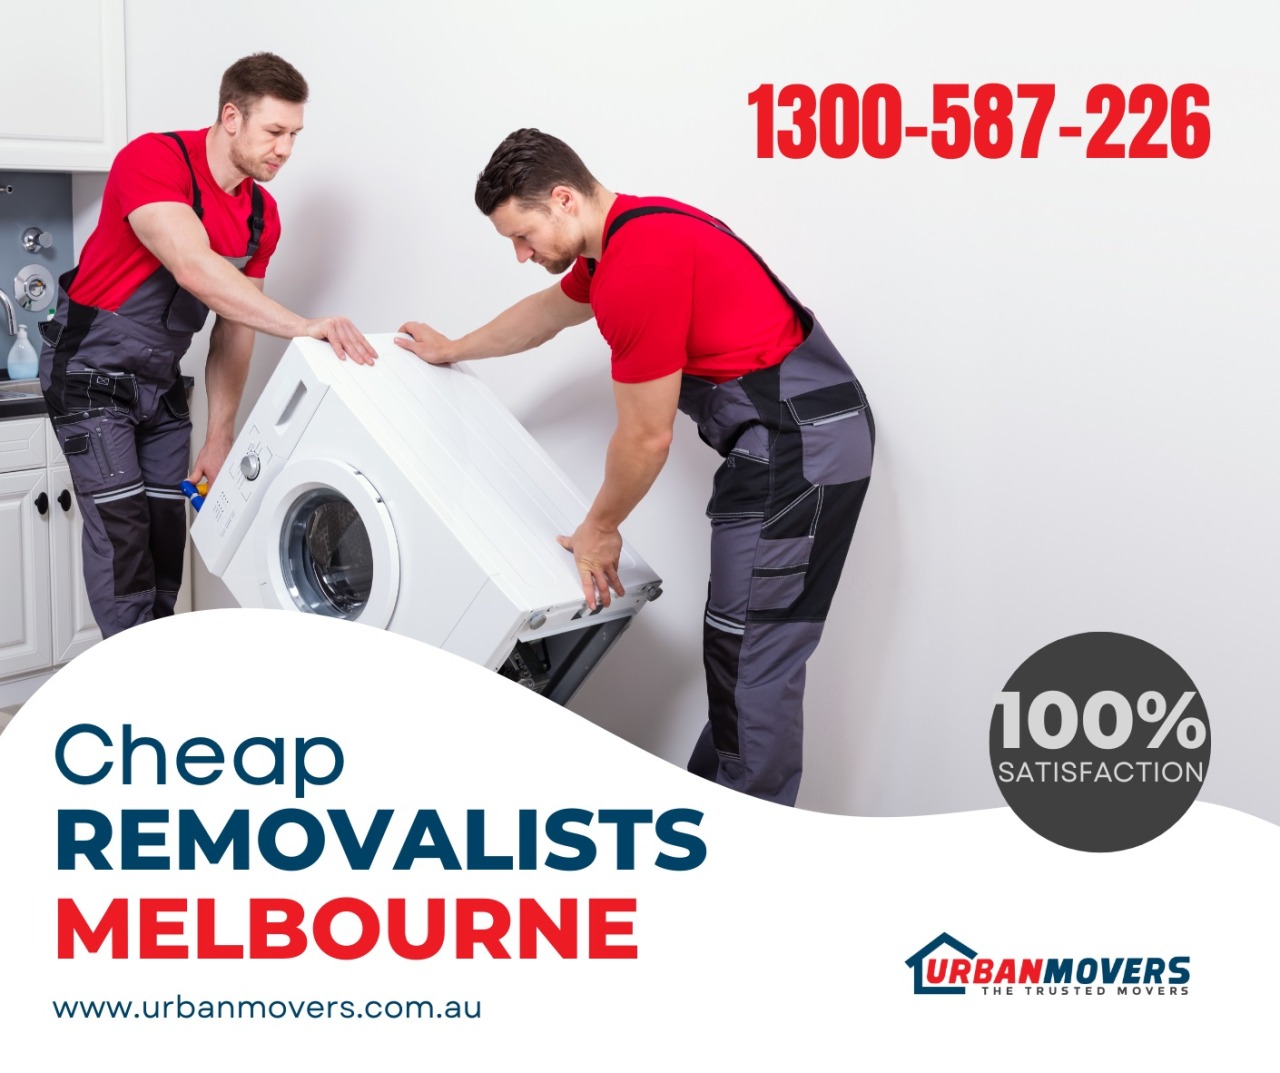 Cheap Removalists Melbourne - Urban Movers